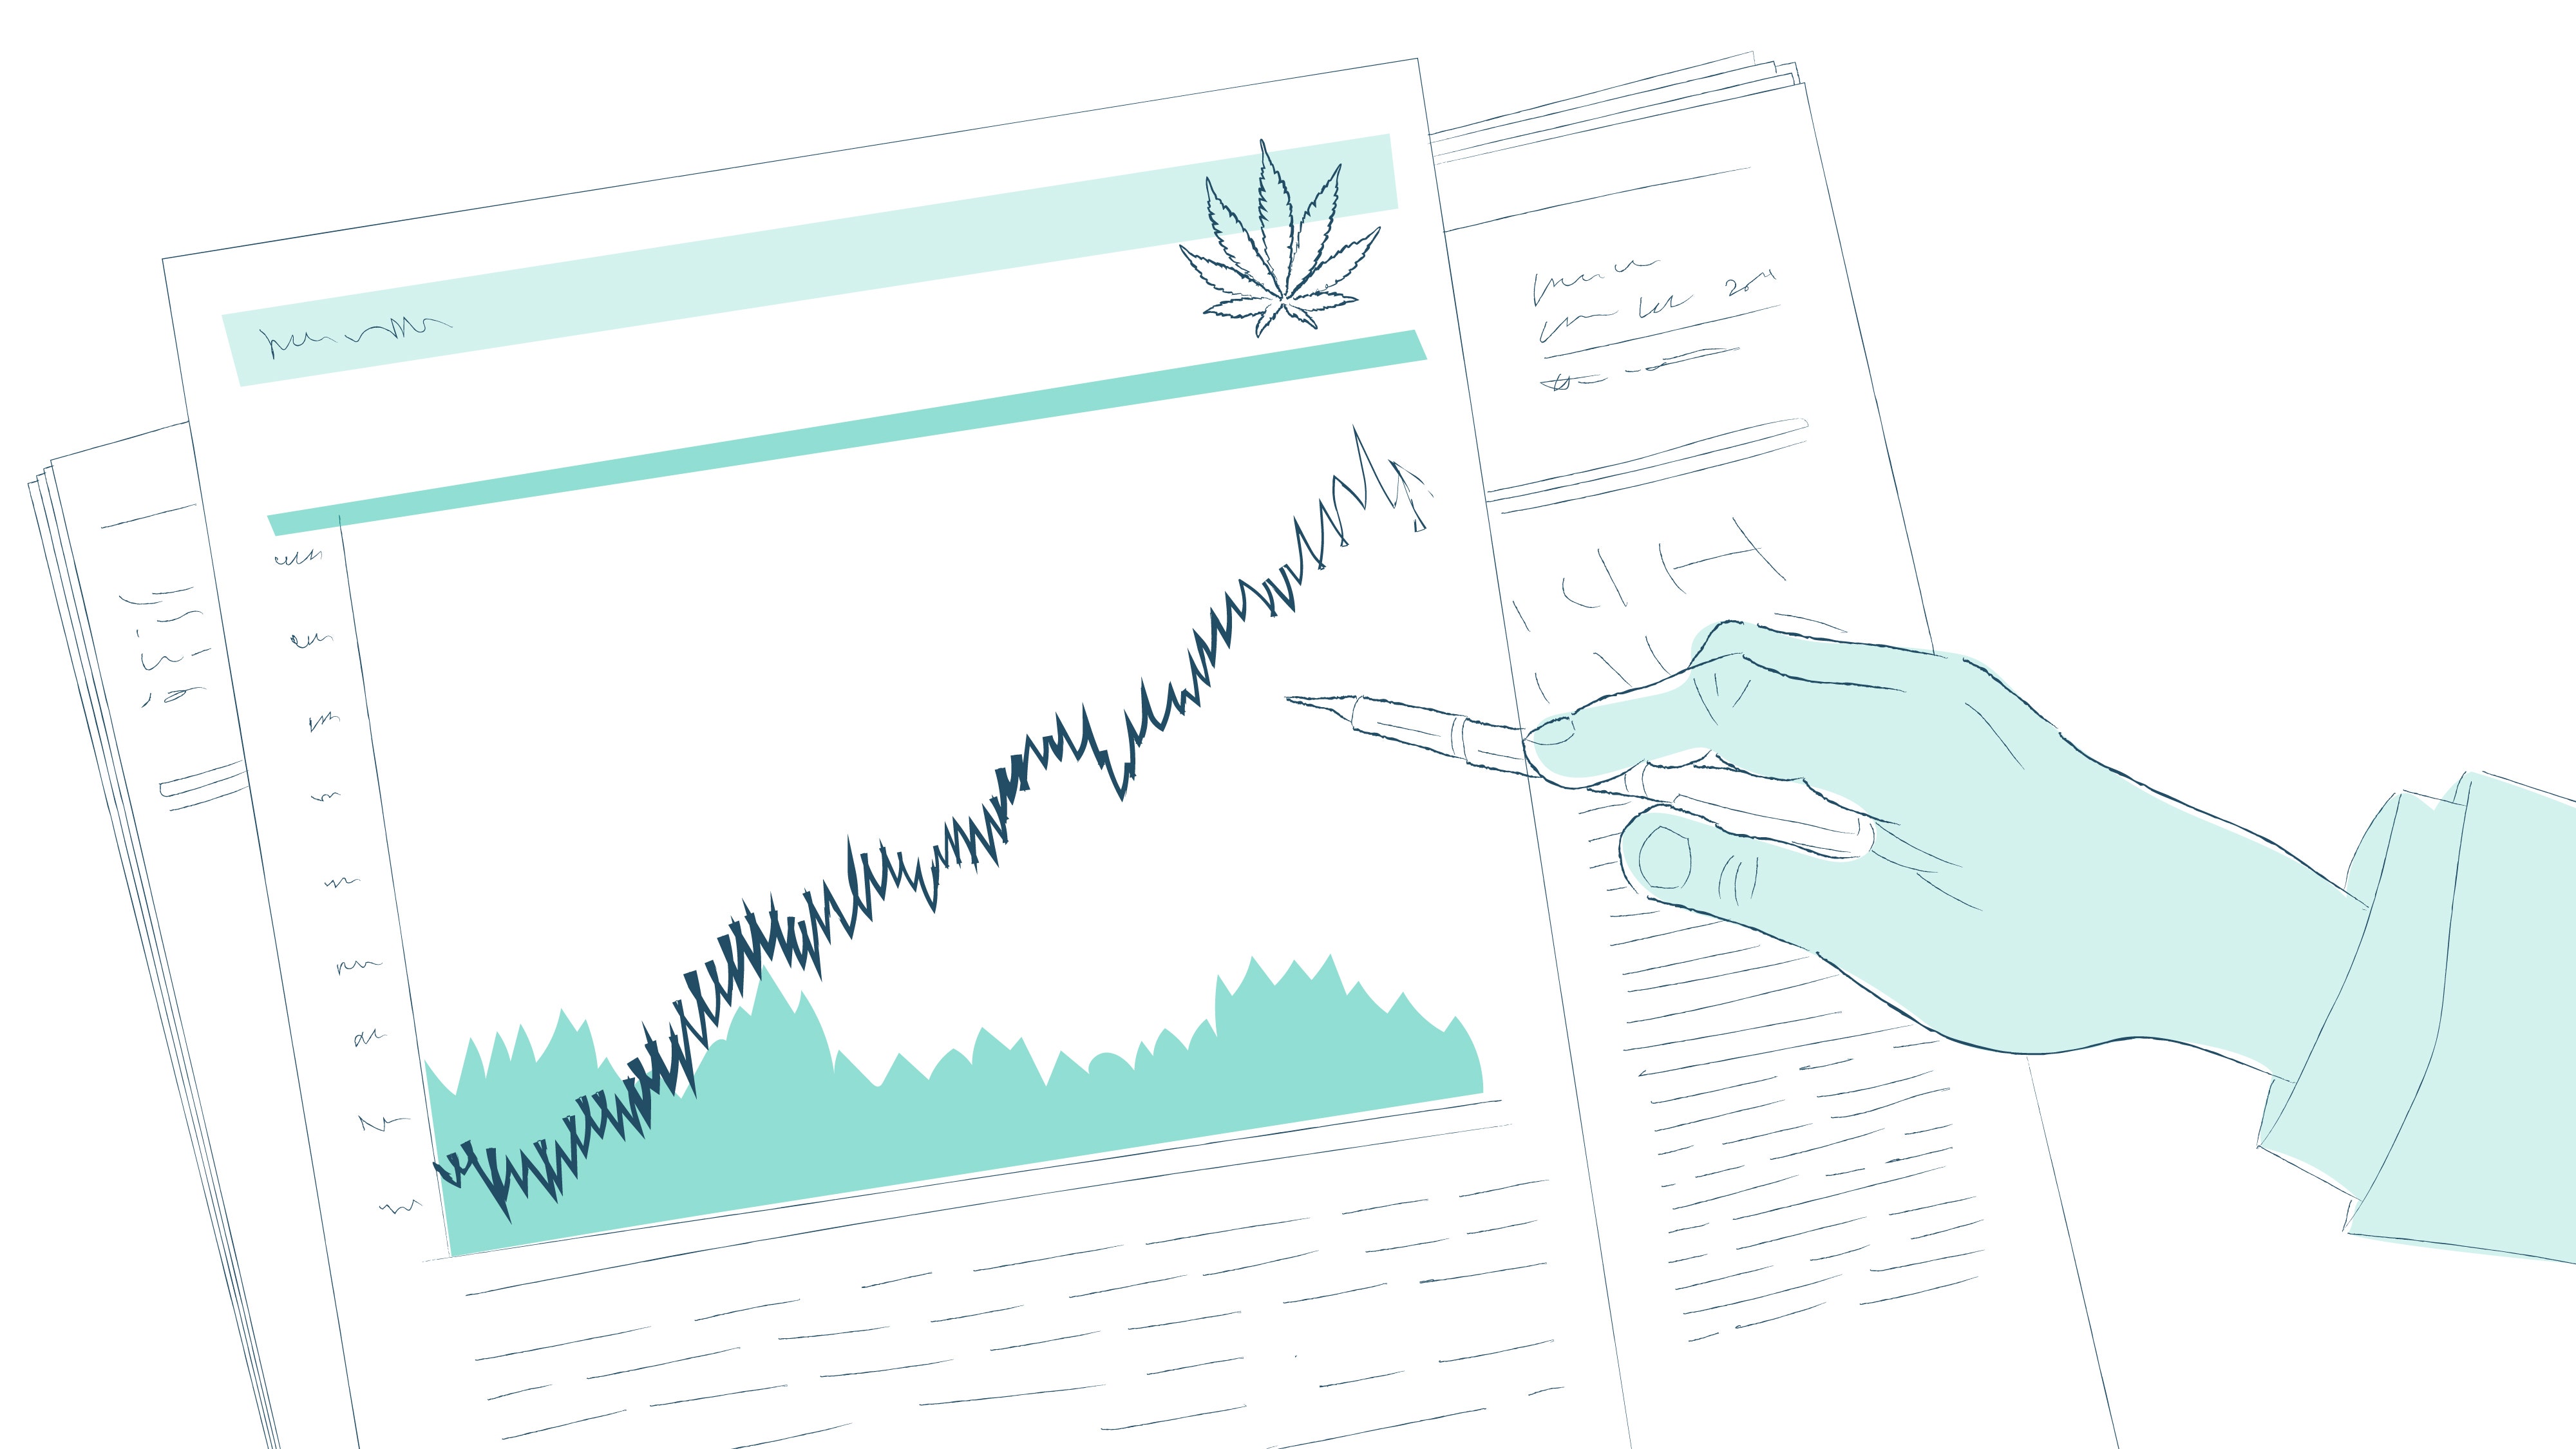 Cannabis Stock Gainers And Losers From December 22, 2020